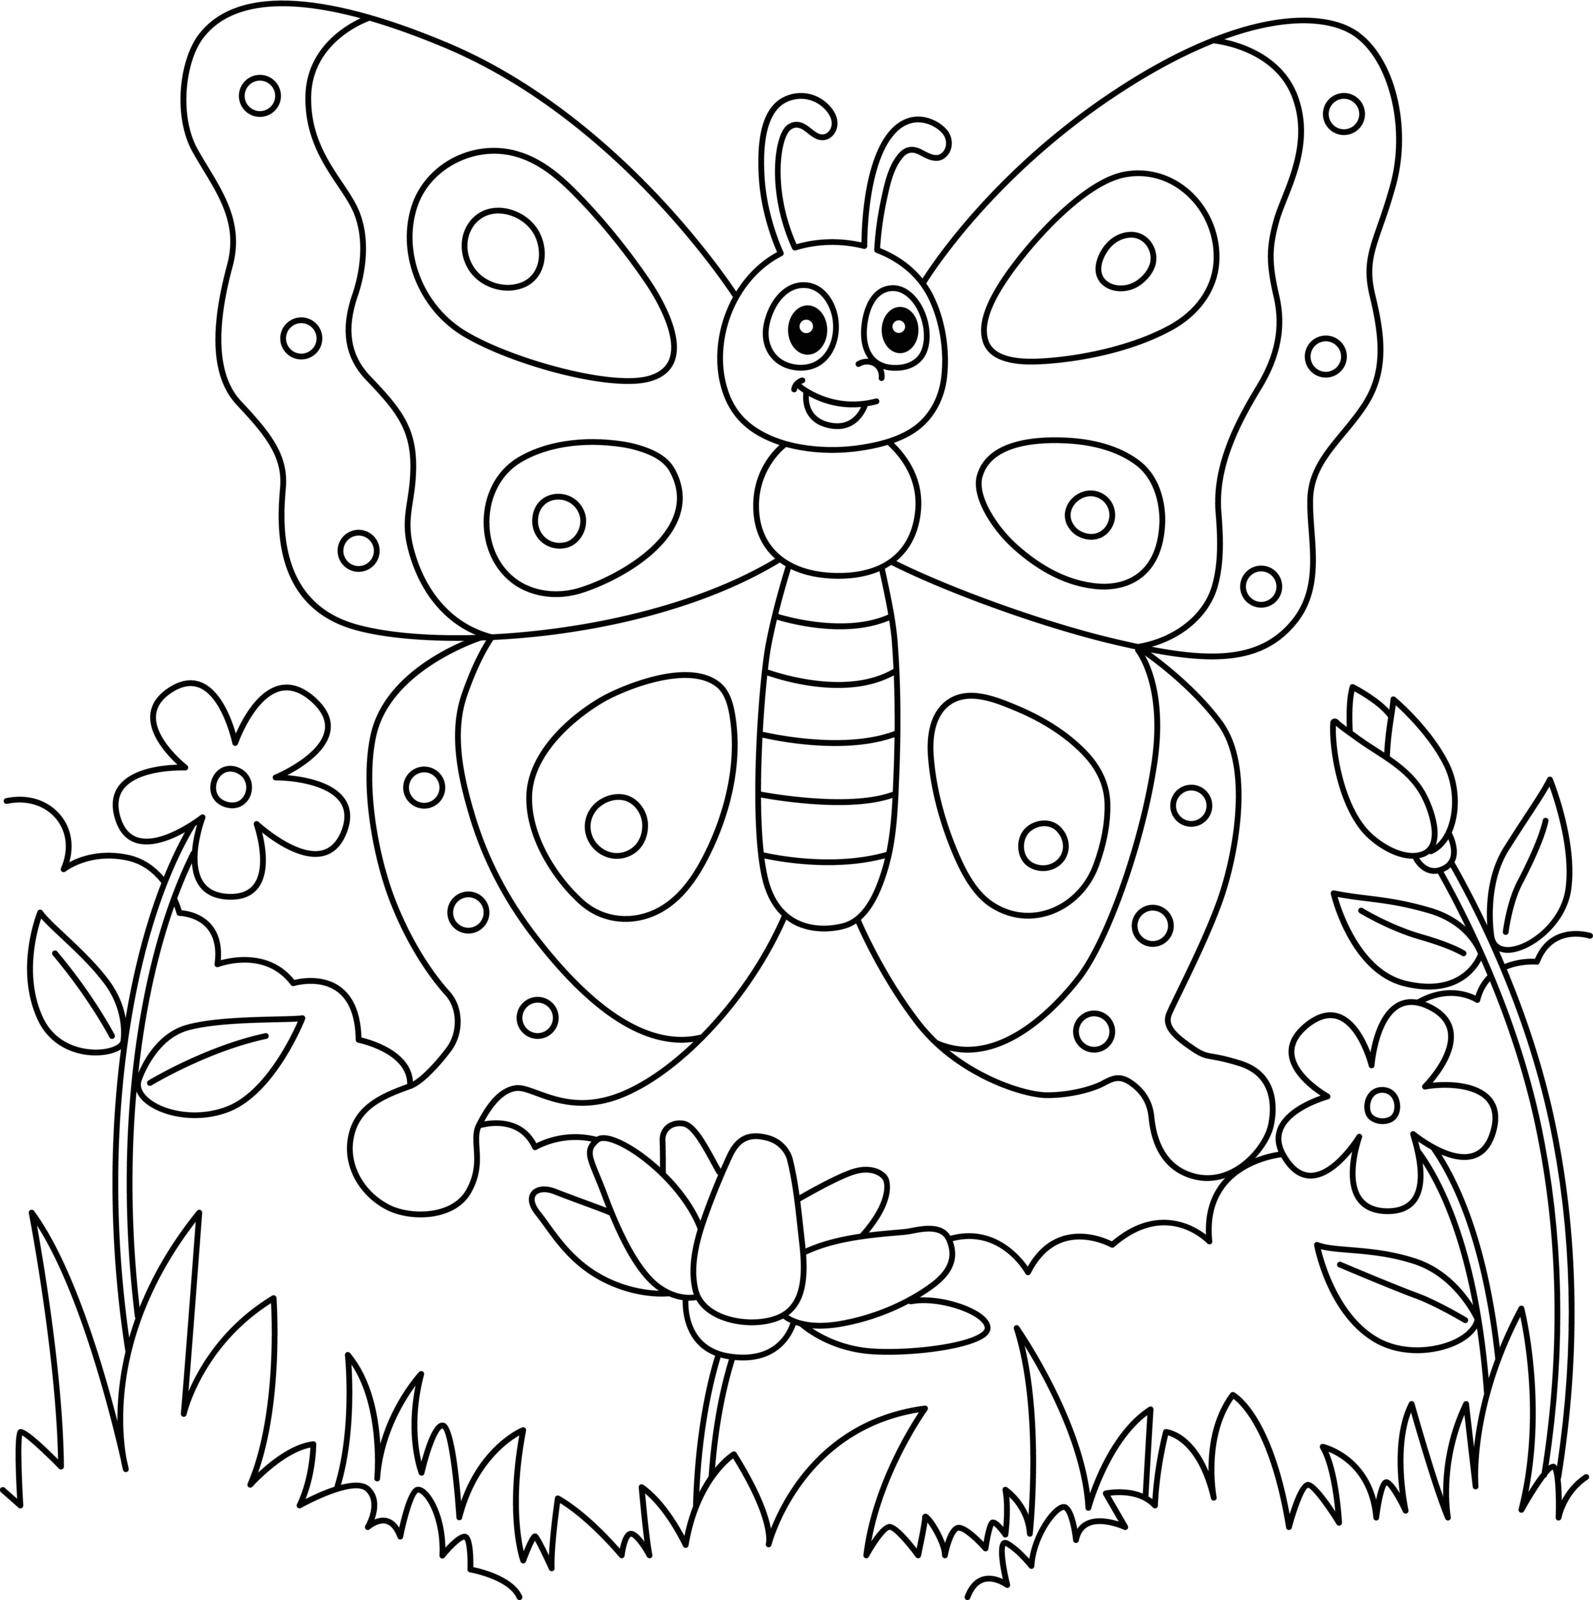 A cute and funny coloring page of a butterfly farm animal. Provides hours of coloring fun for children. To color, this page is very easy. Suitable for little kids and toddlers.